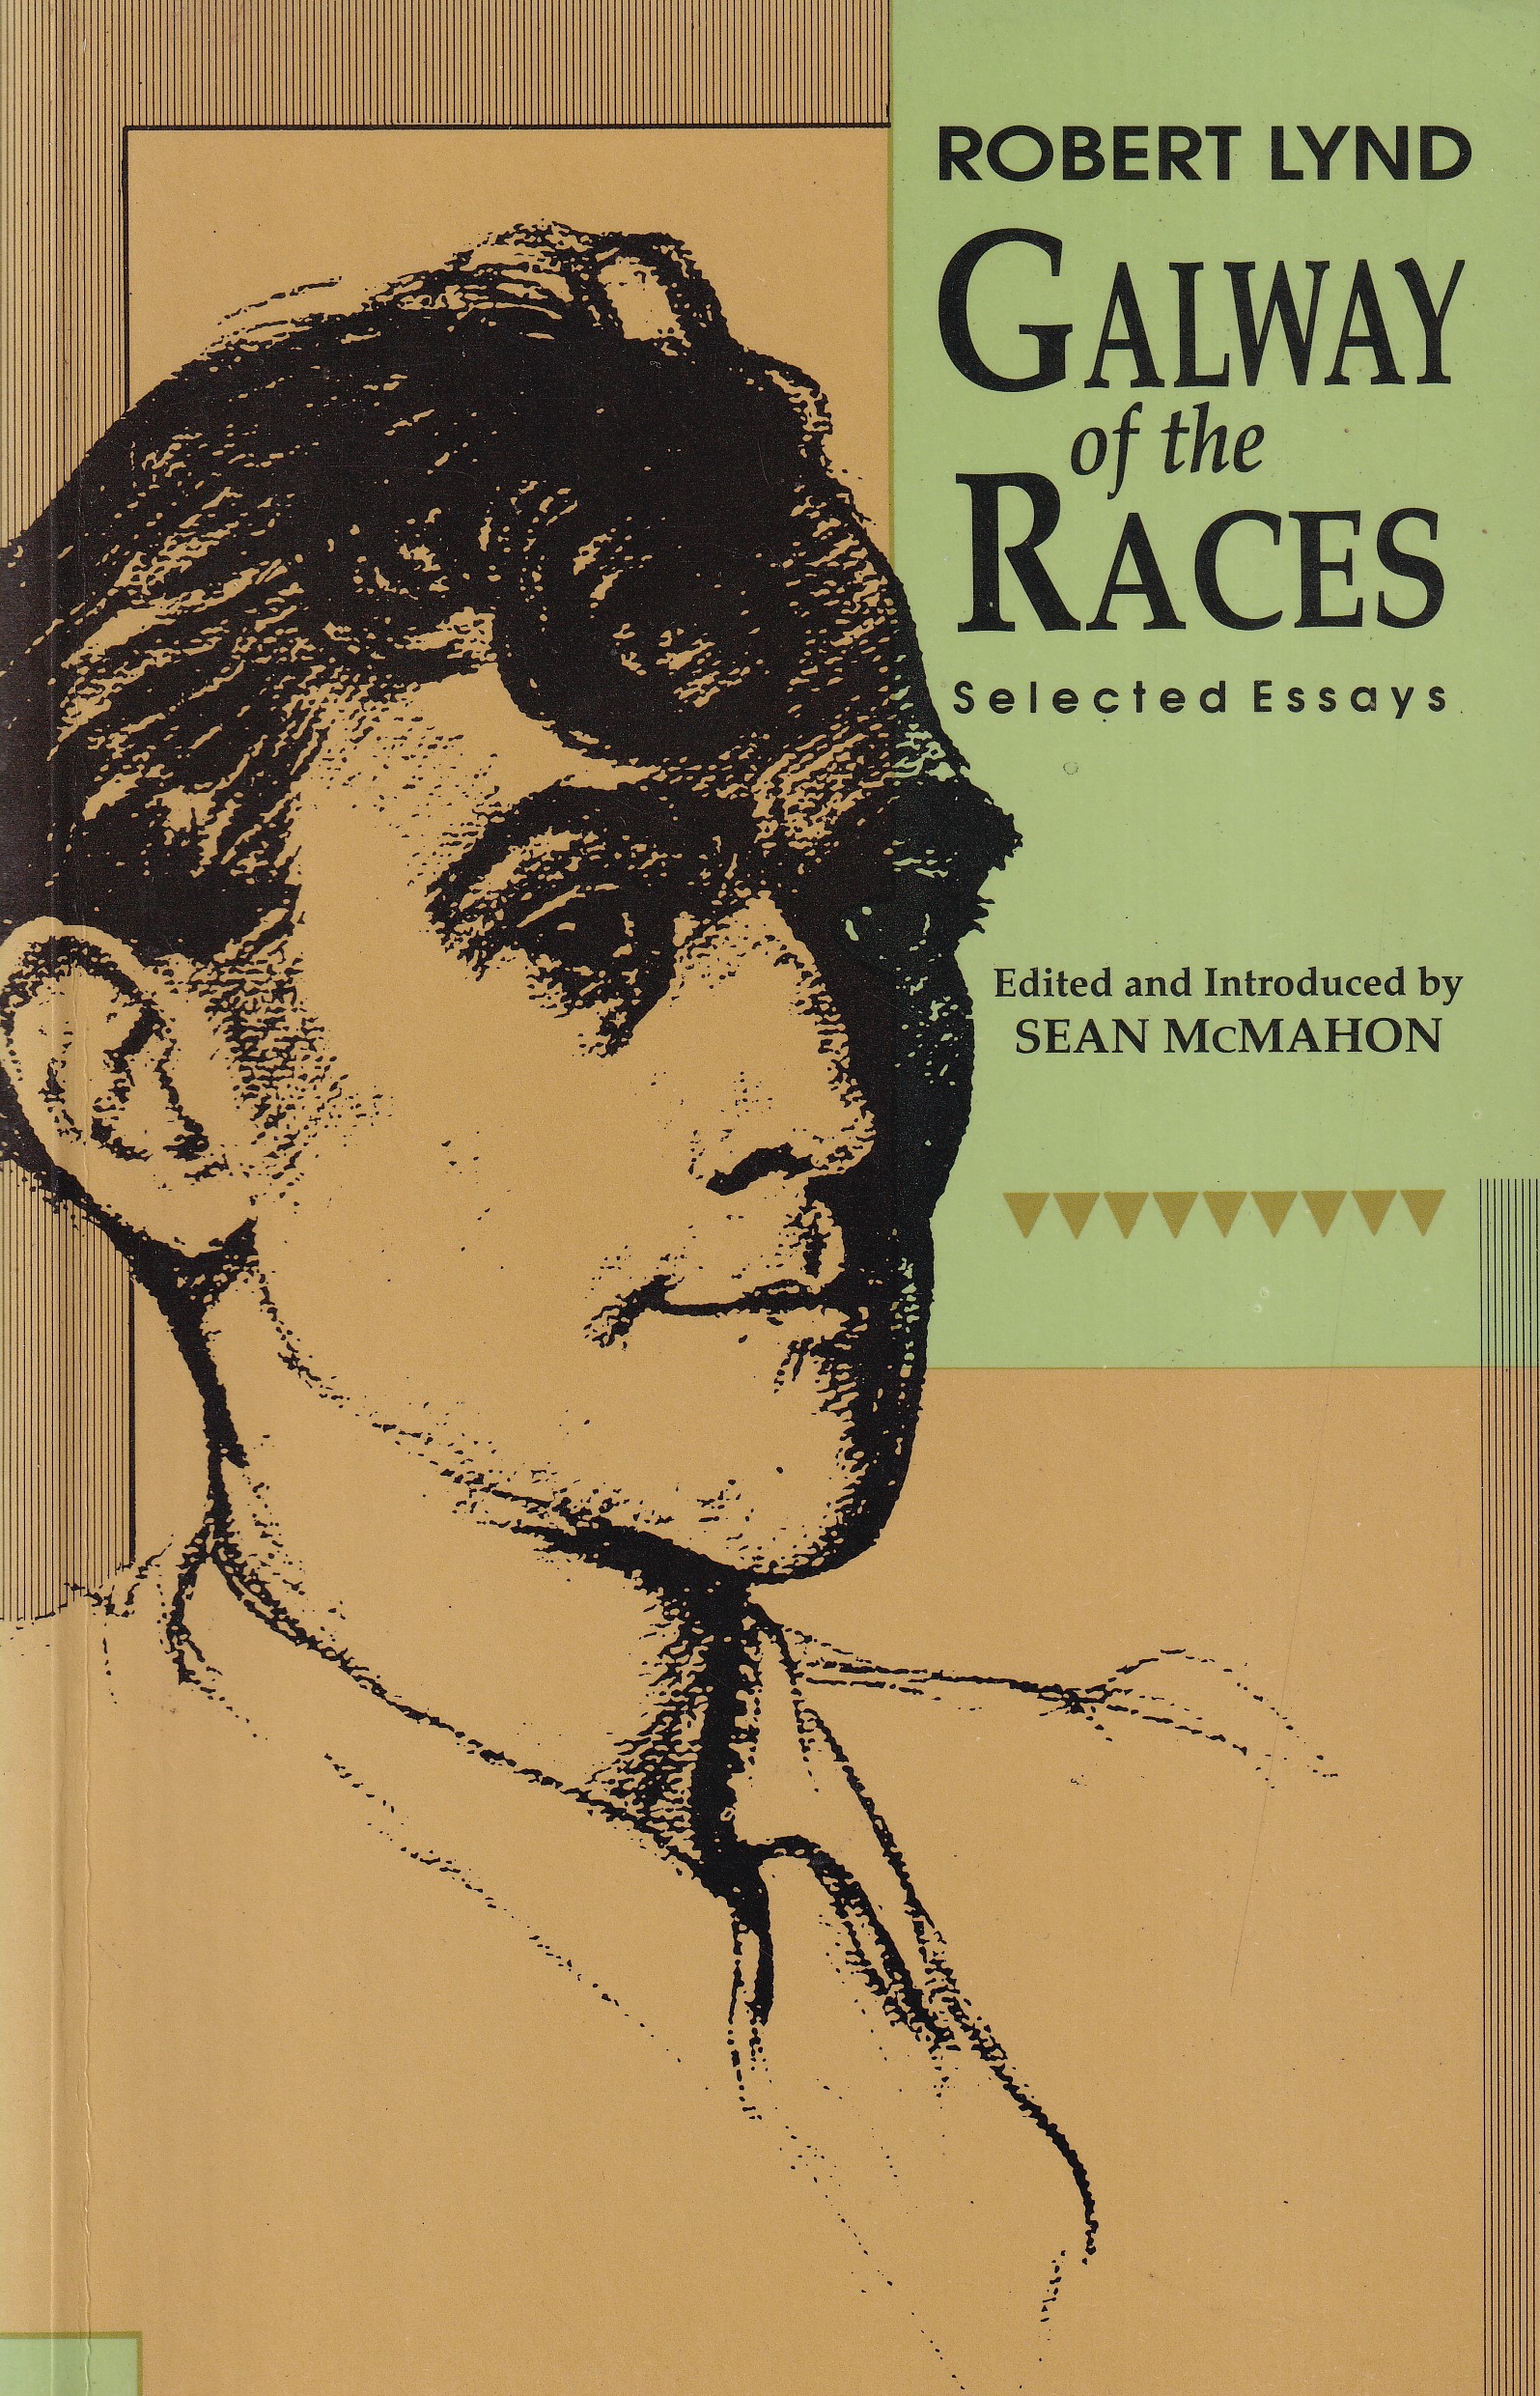 Galway of the Races: Selected Essays | Robert Lynd | Charlie Byrne's